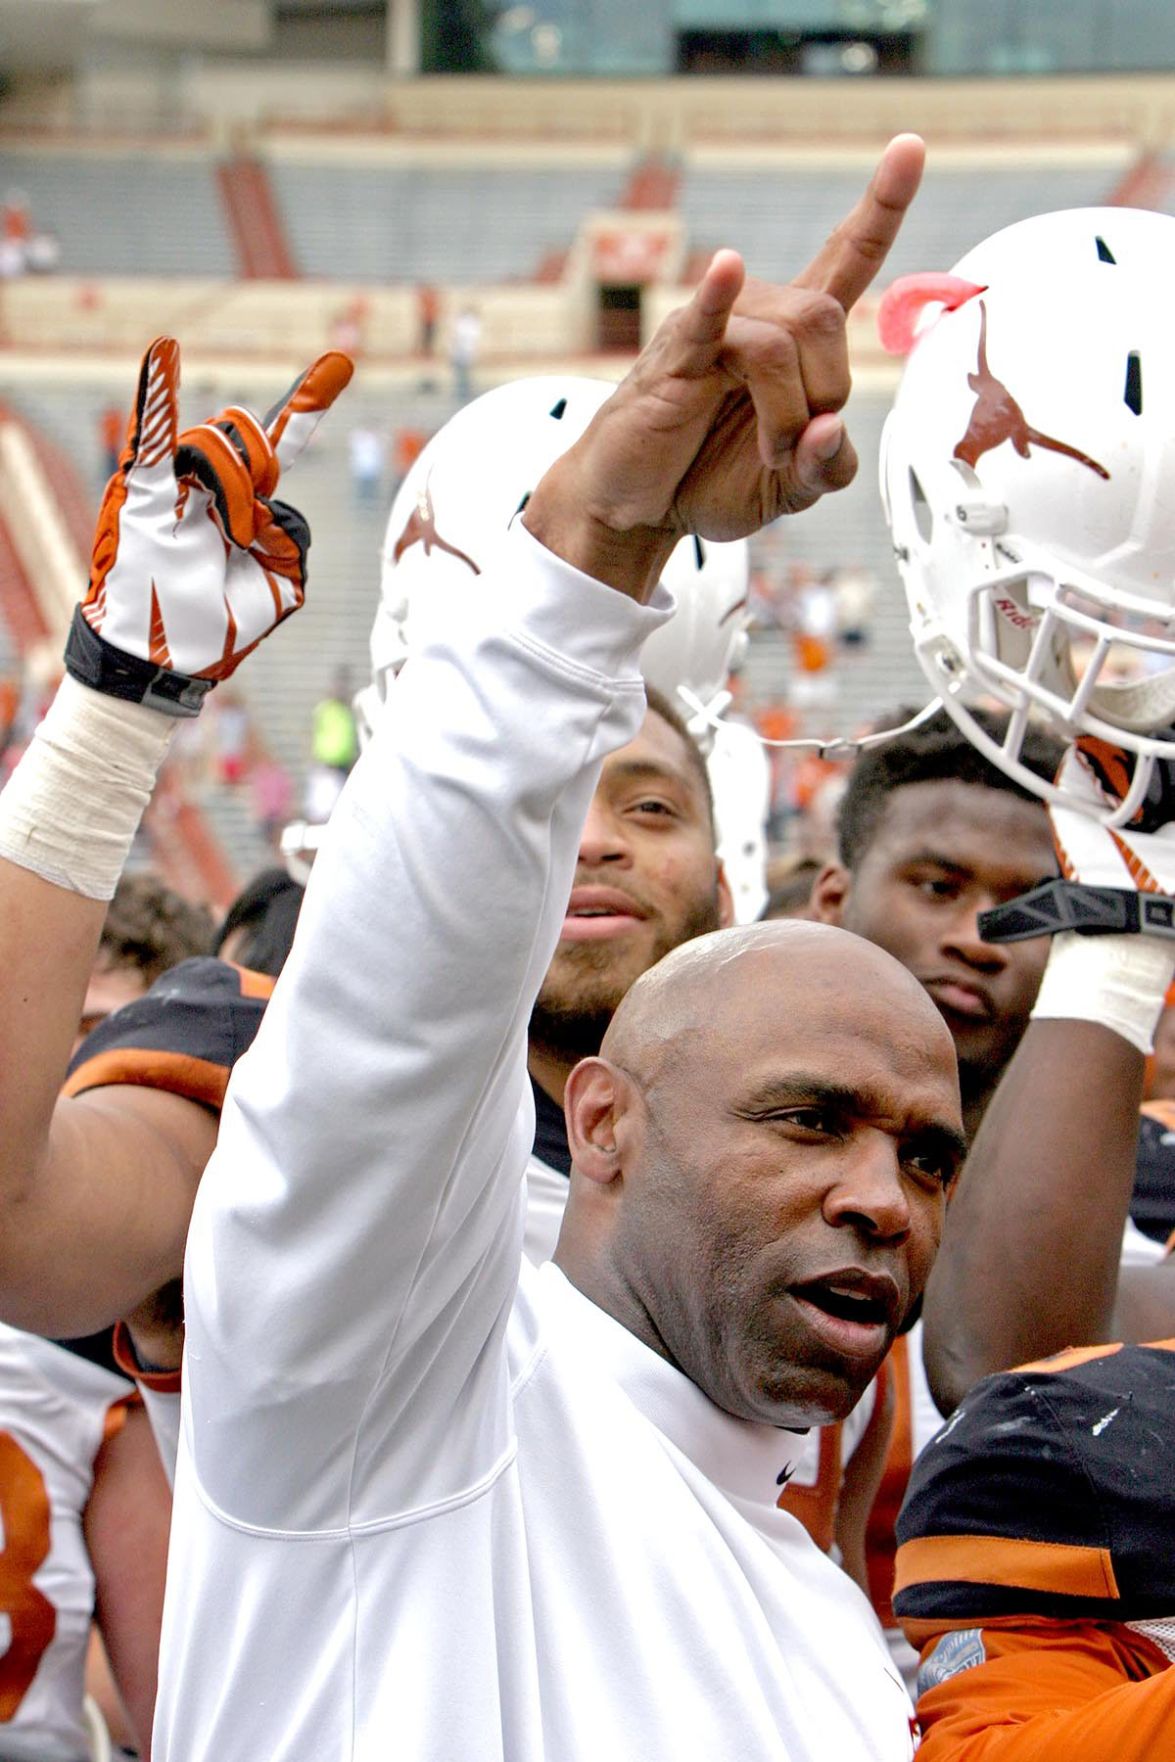 Longhorns hoping new leader is Strong enough | Baylor Bears Football | wacotrib.com